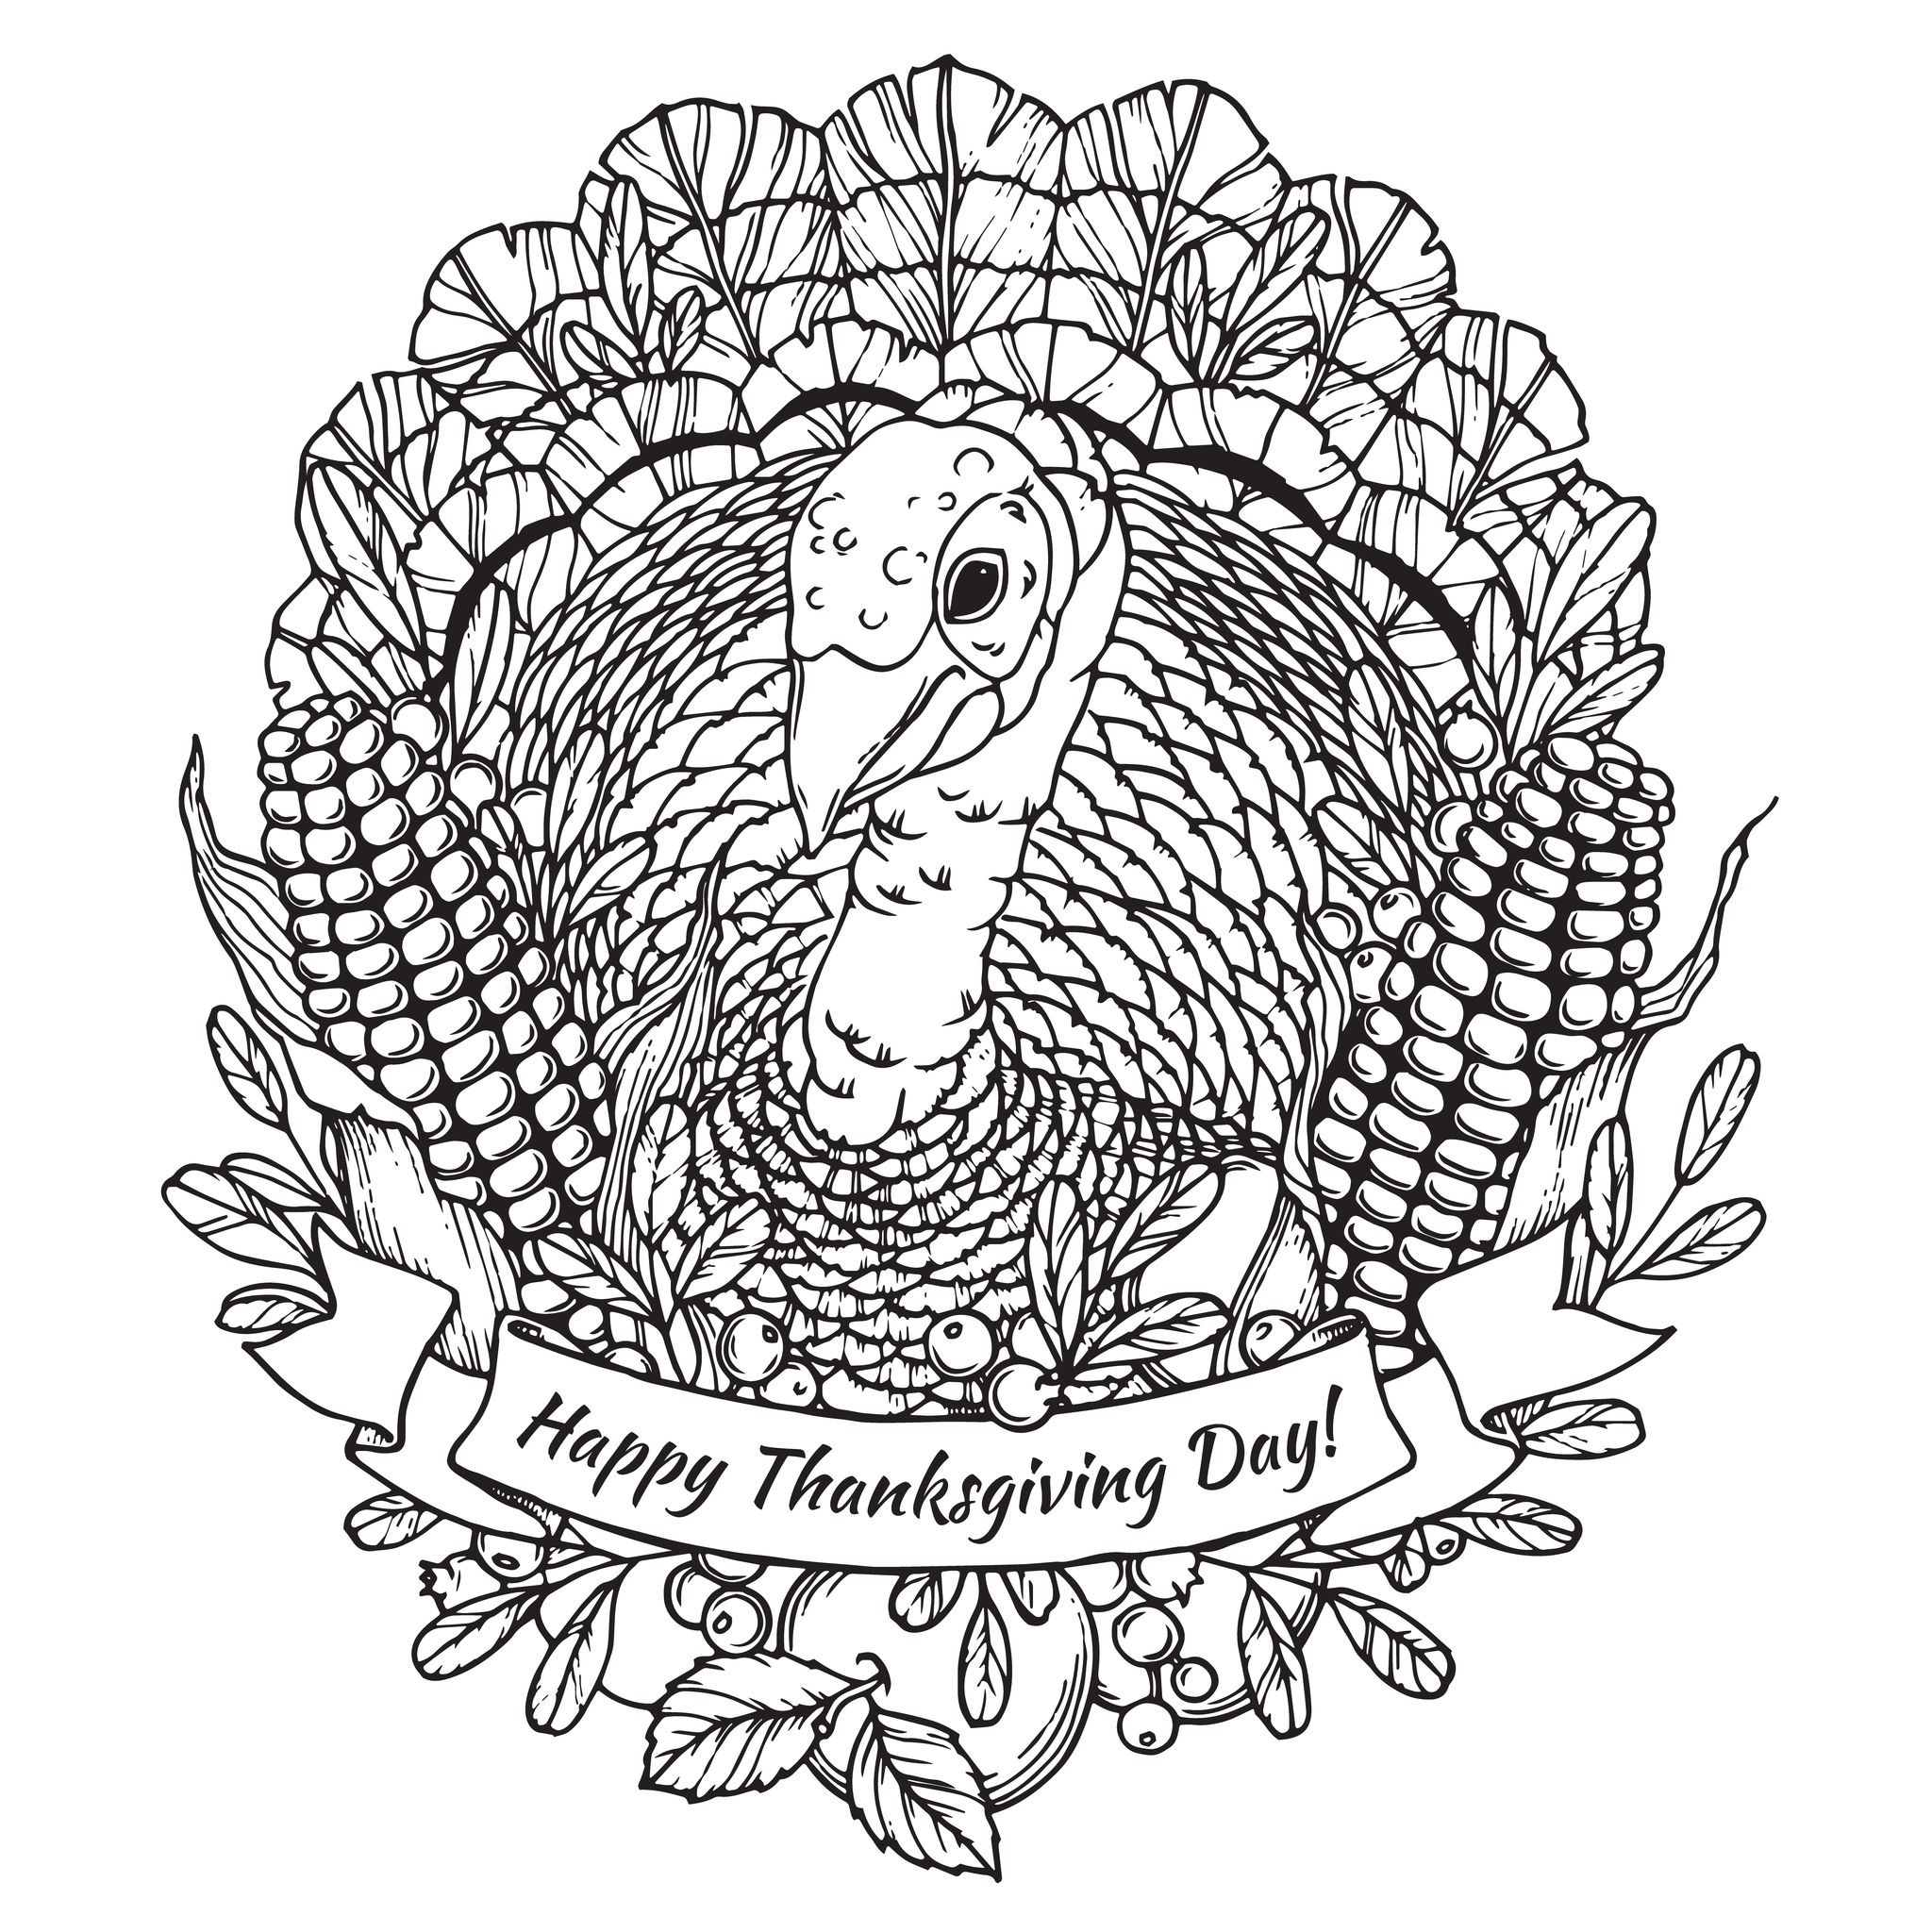 Thanksgiving day coloring page with turkey, vegetables (corn) and fruits, Artist : Frauleinfreya   Source : 123rf